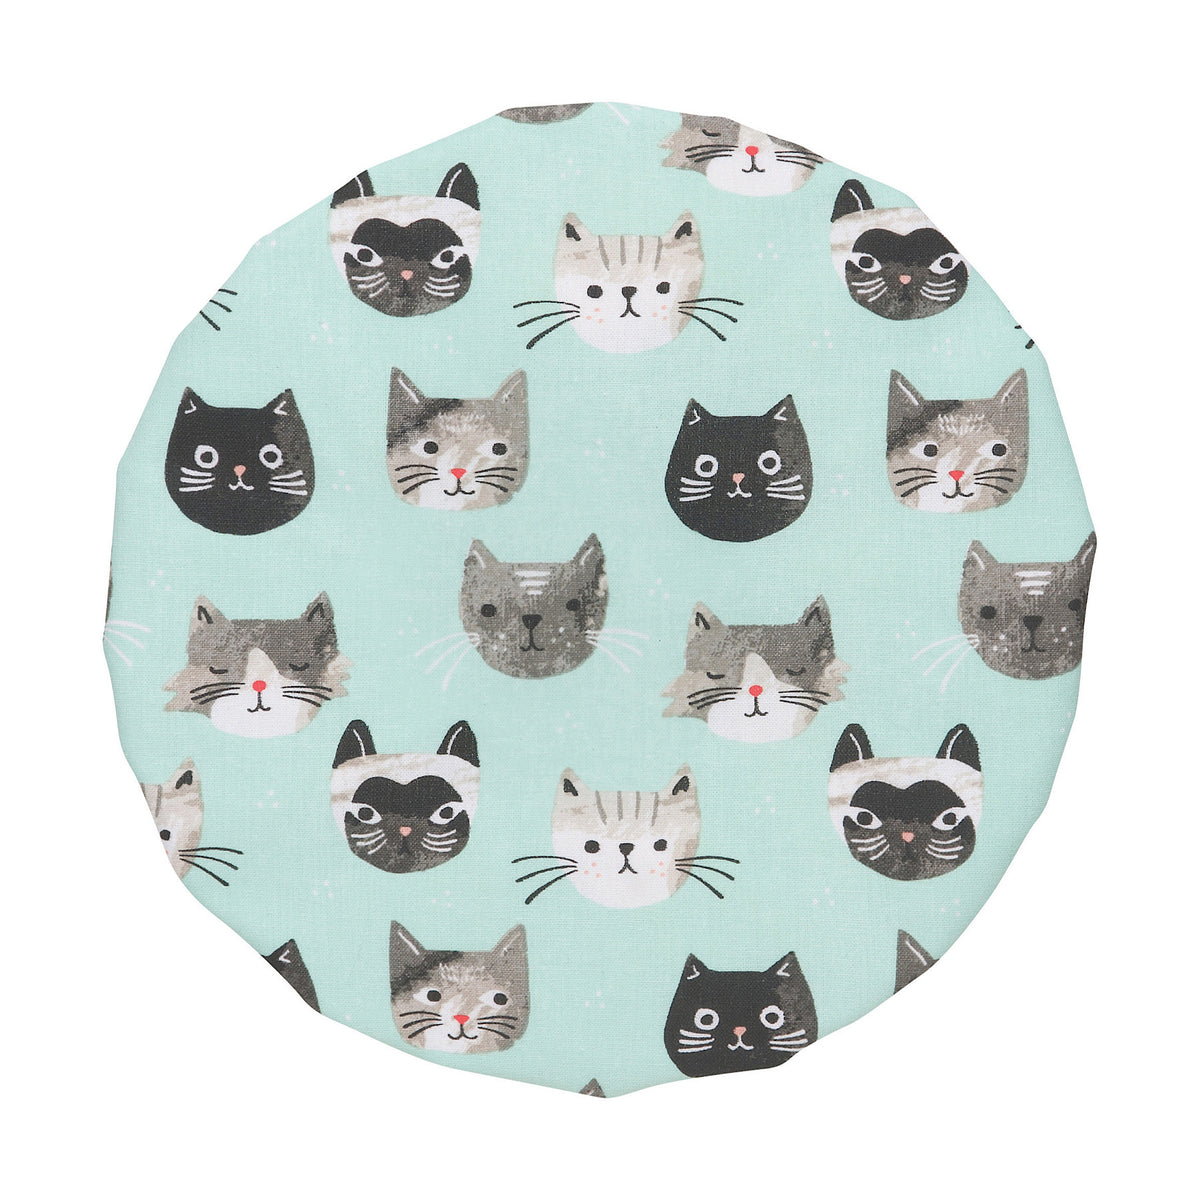 Cats Meow Bowl Cover, Set of 2